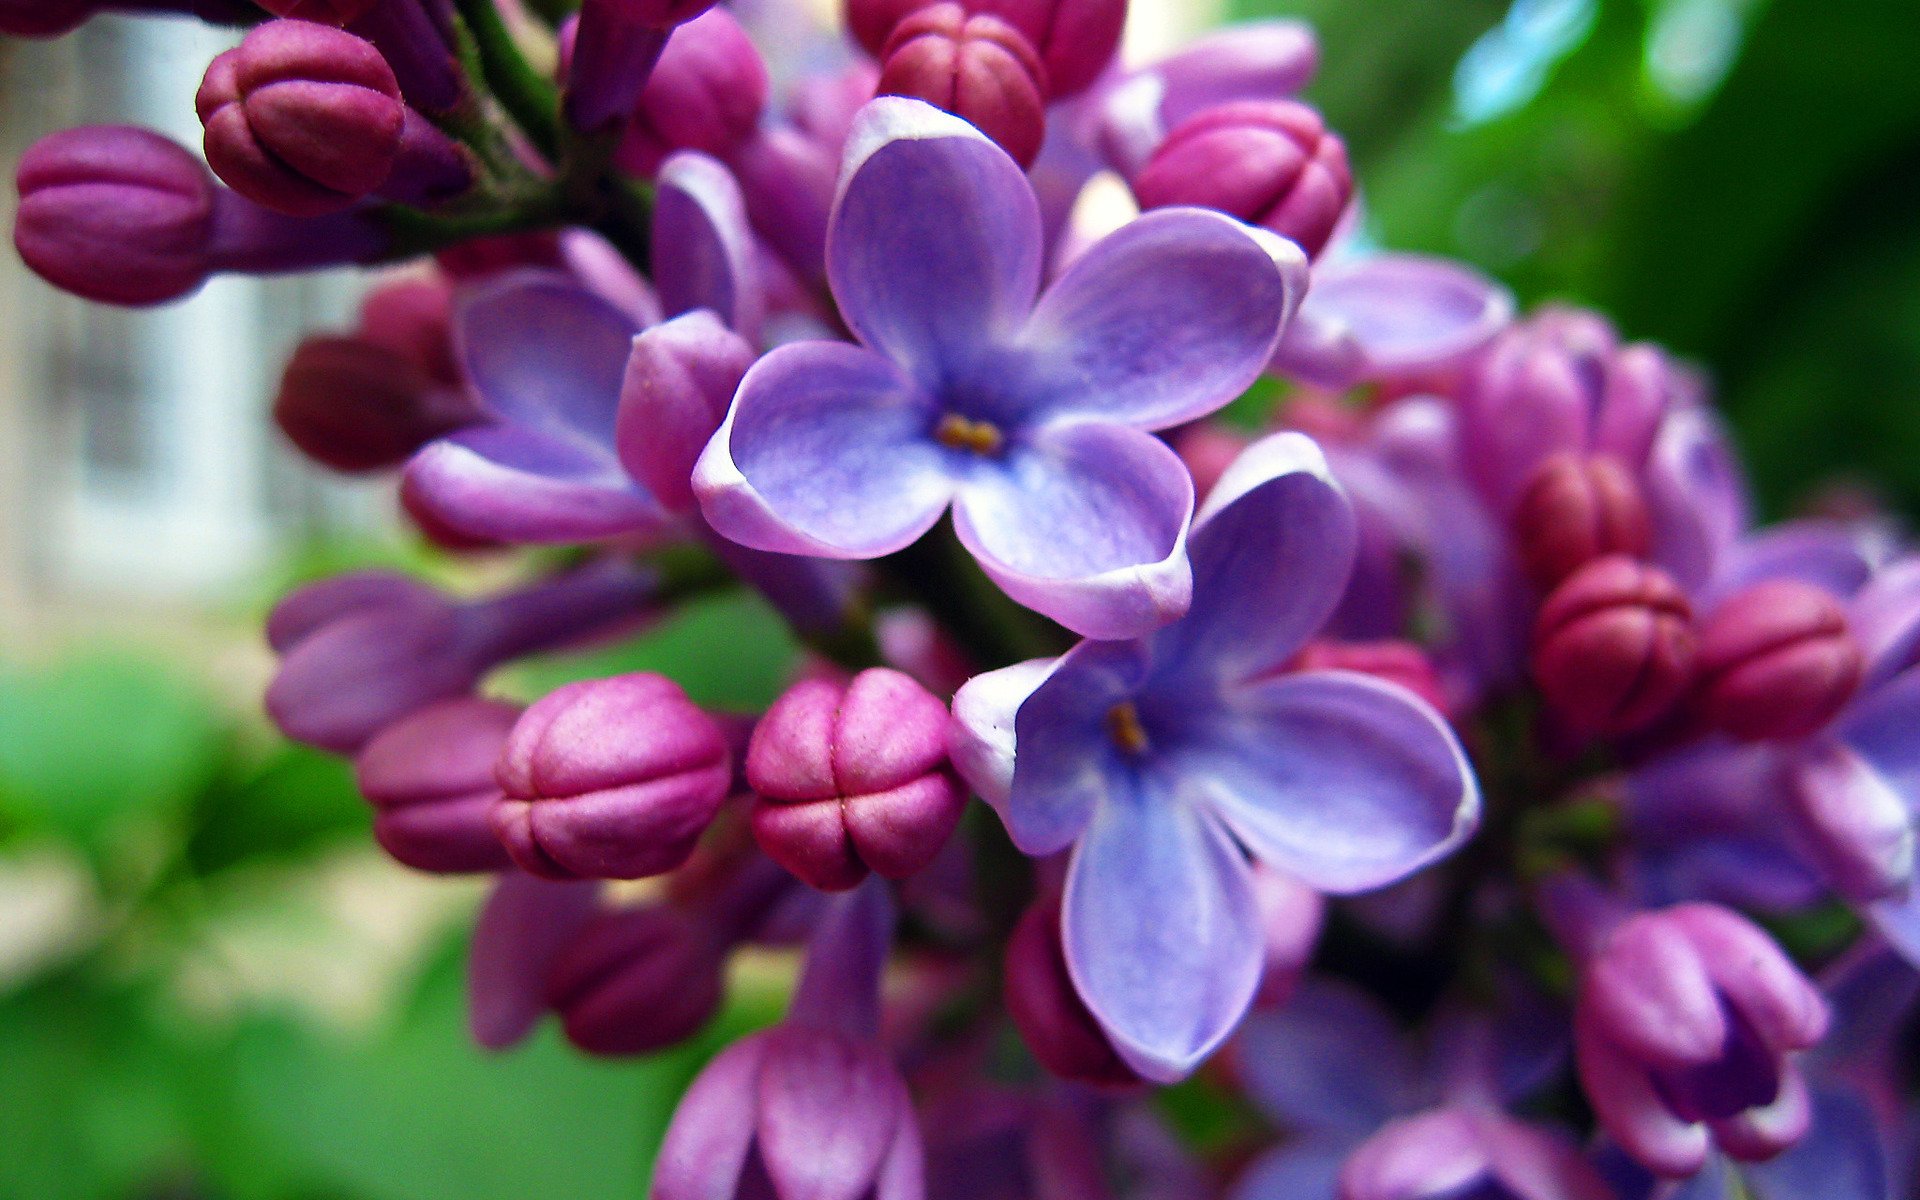 Lilac wallpaper and image, picture, photo